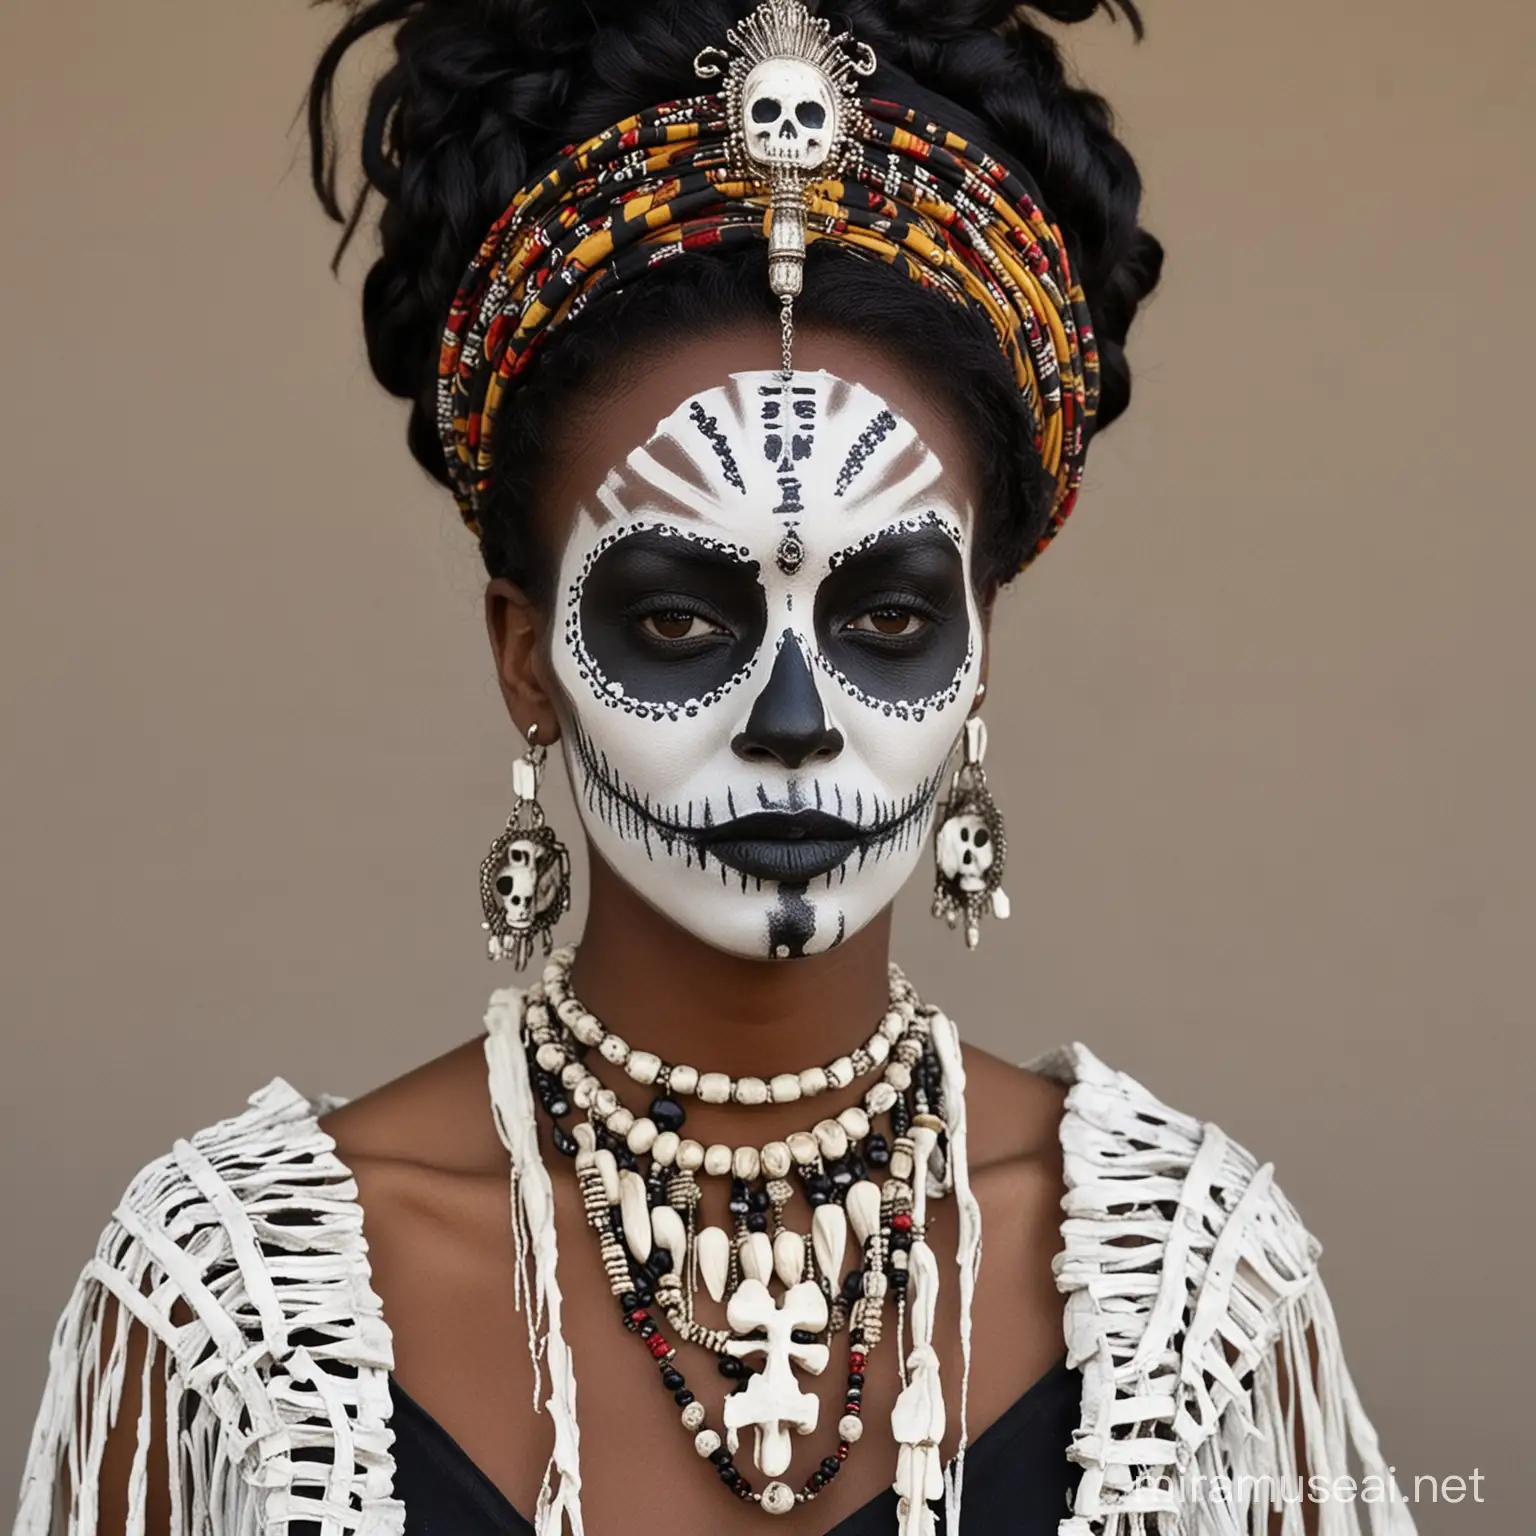 creole voodoo queen, bone necklace, black/white skeleton face paint, african clothes